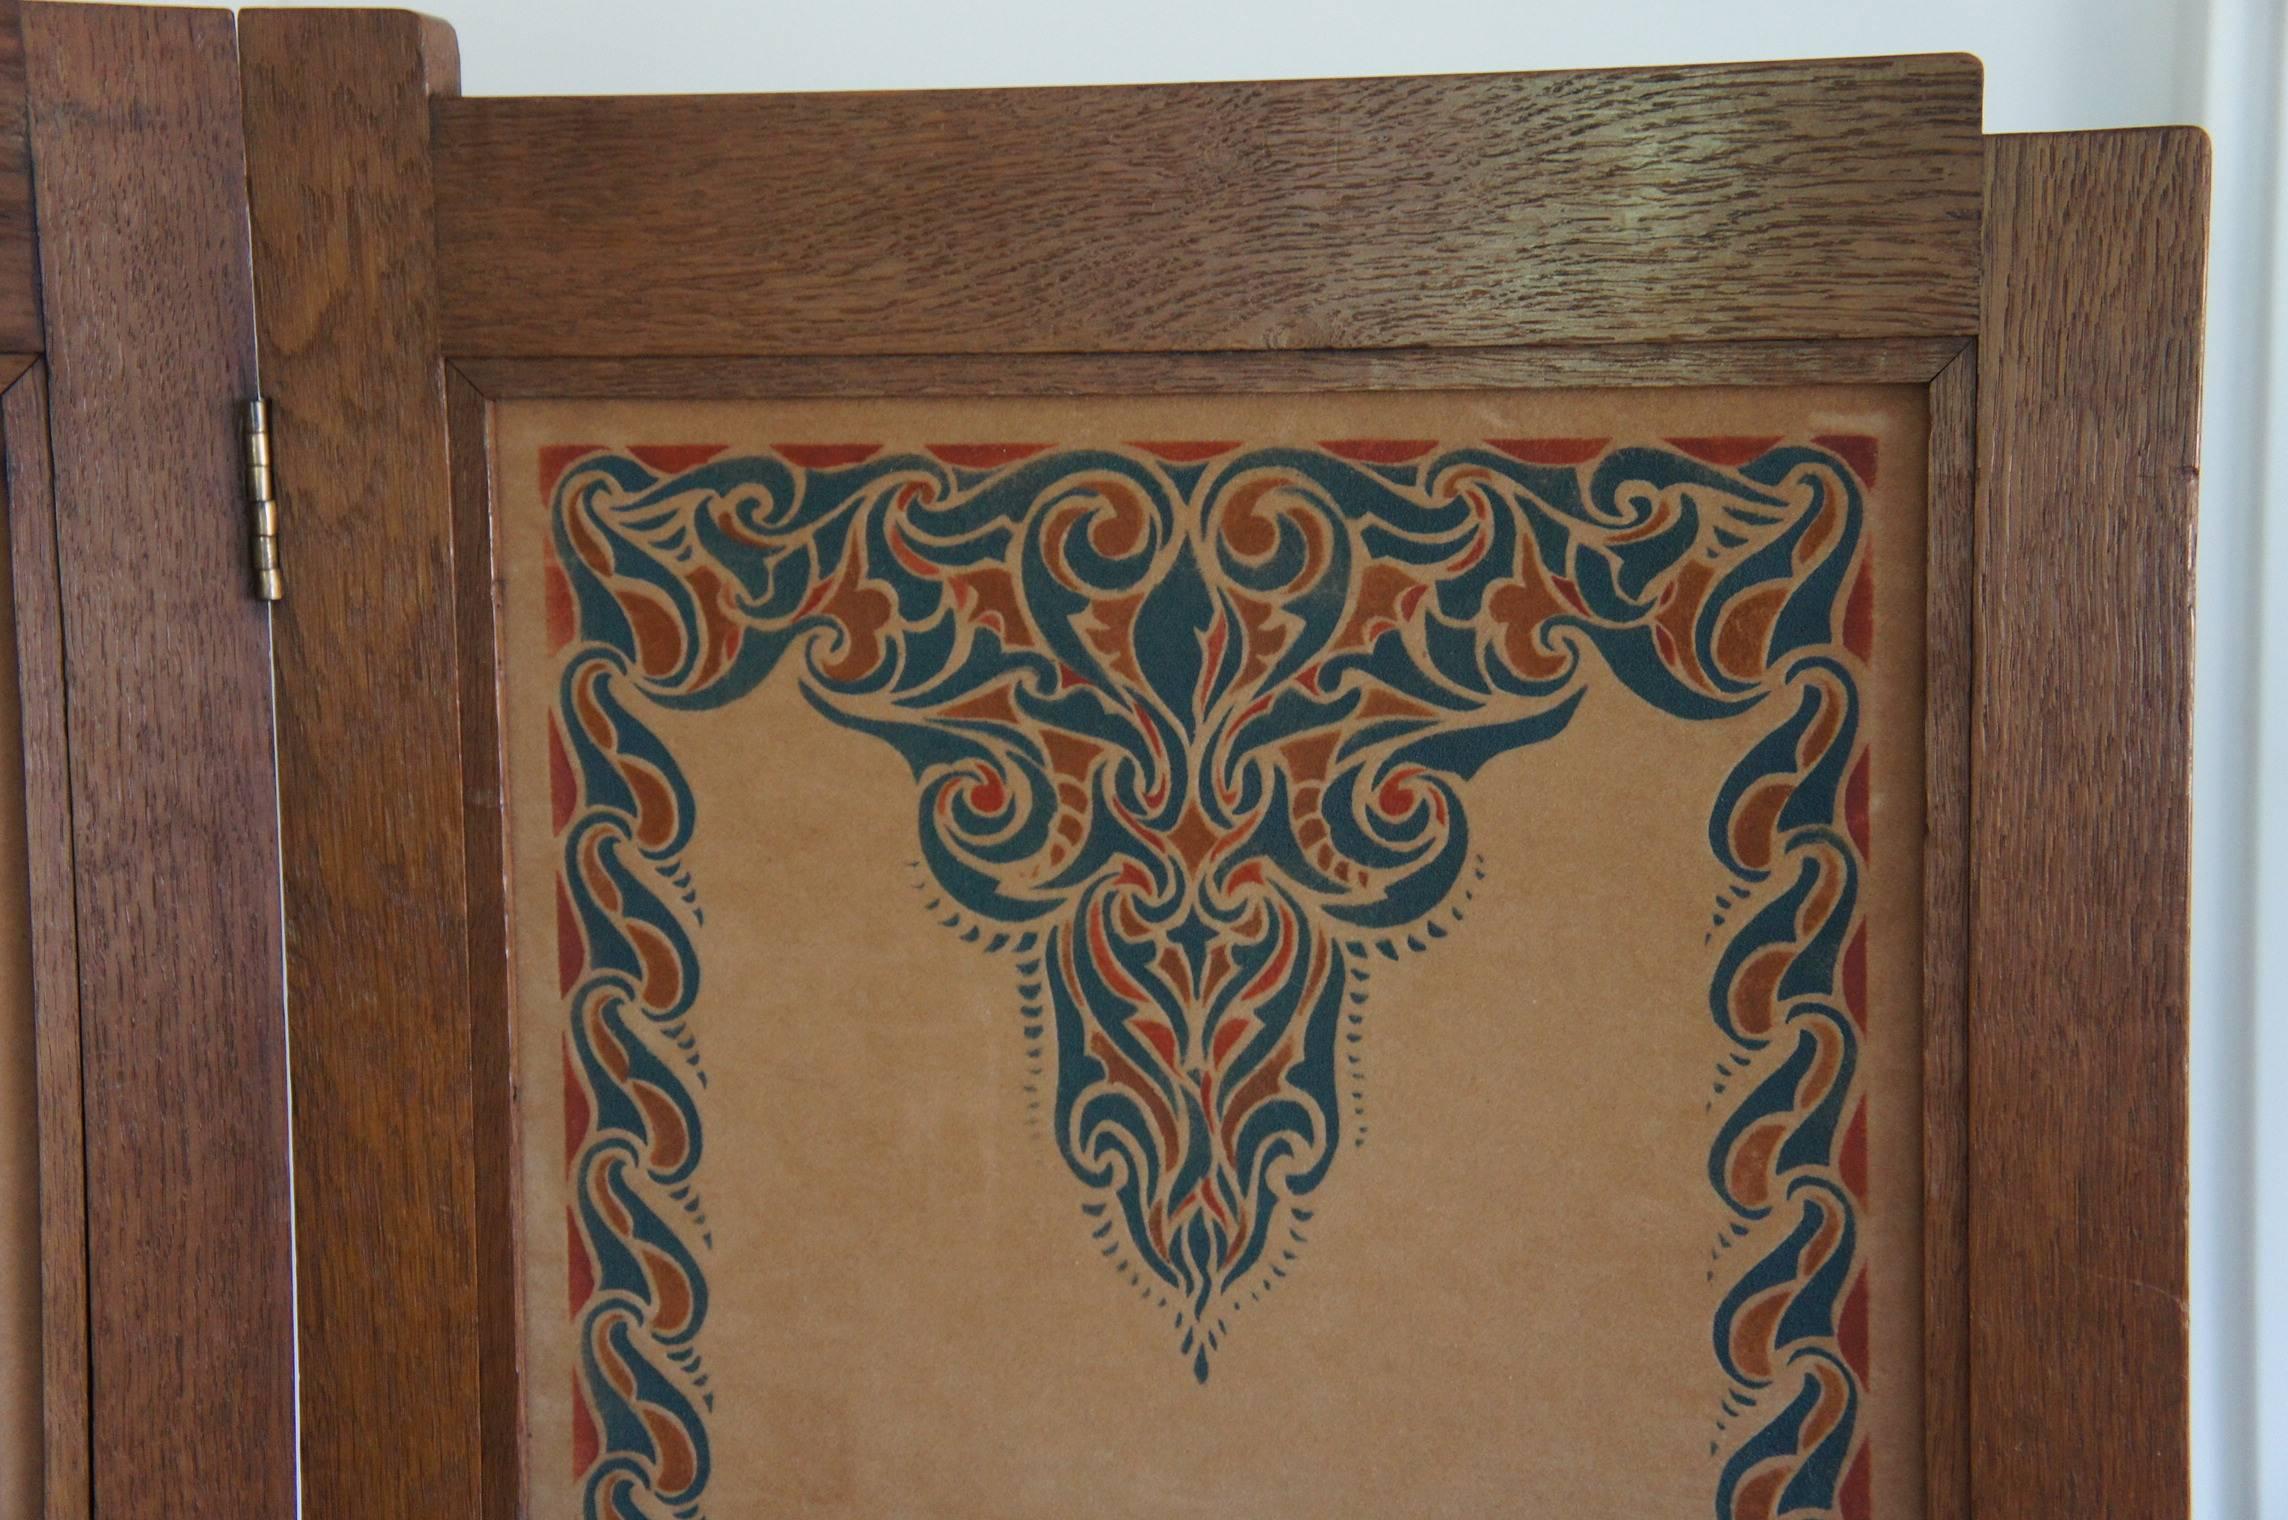 20th Century Dutch Arts and Crafts Folding Screen with Batik Printed Felt on Wooden Panels